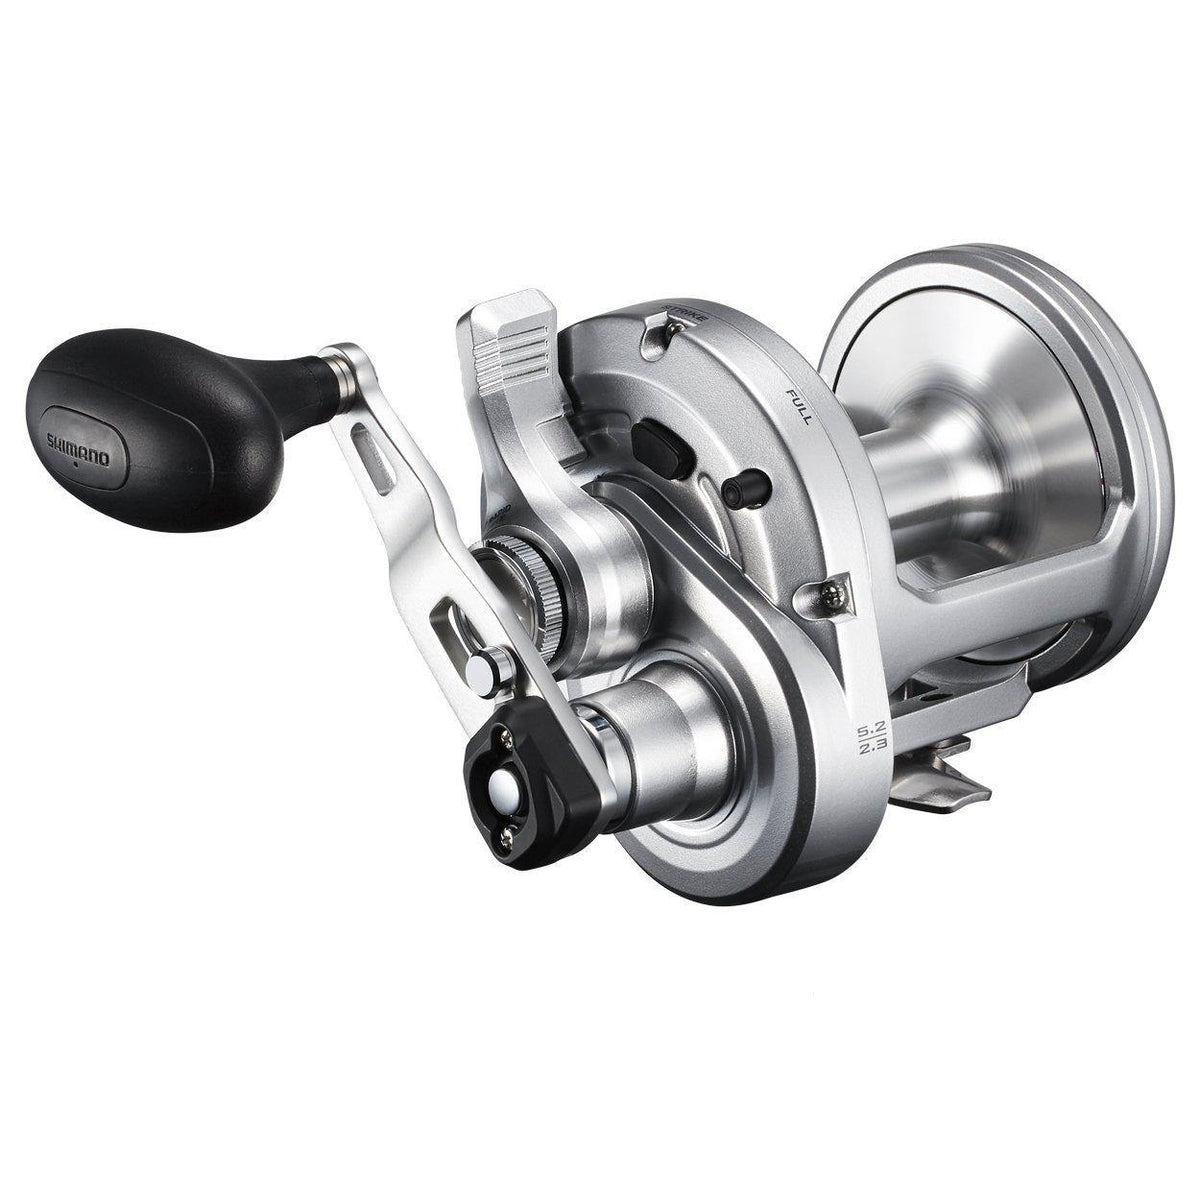 Fishing Reels - The best high quality fishing reels in Australia - Addict  Tackle